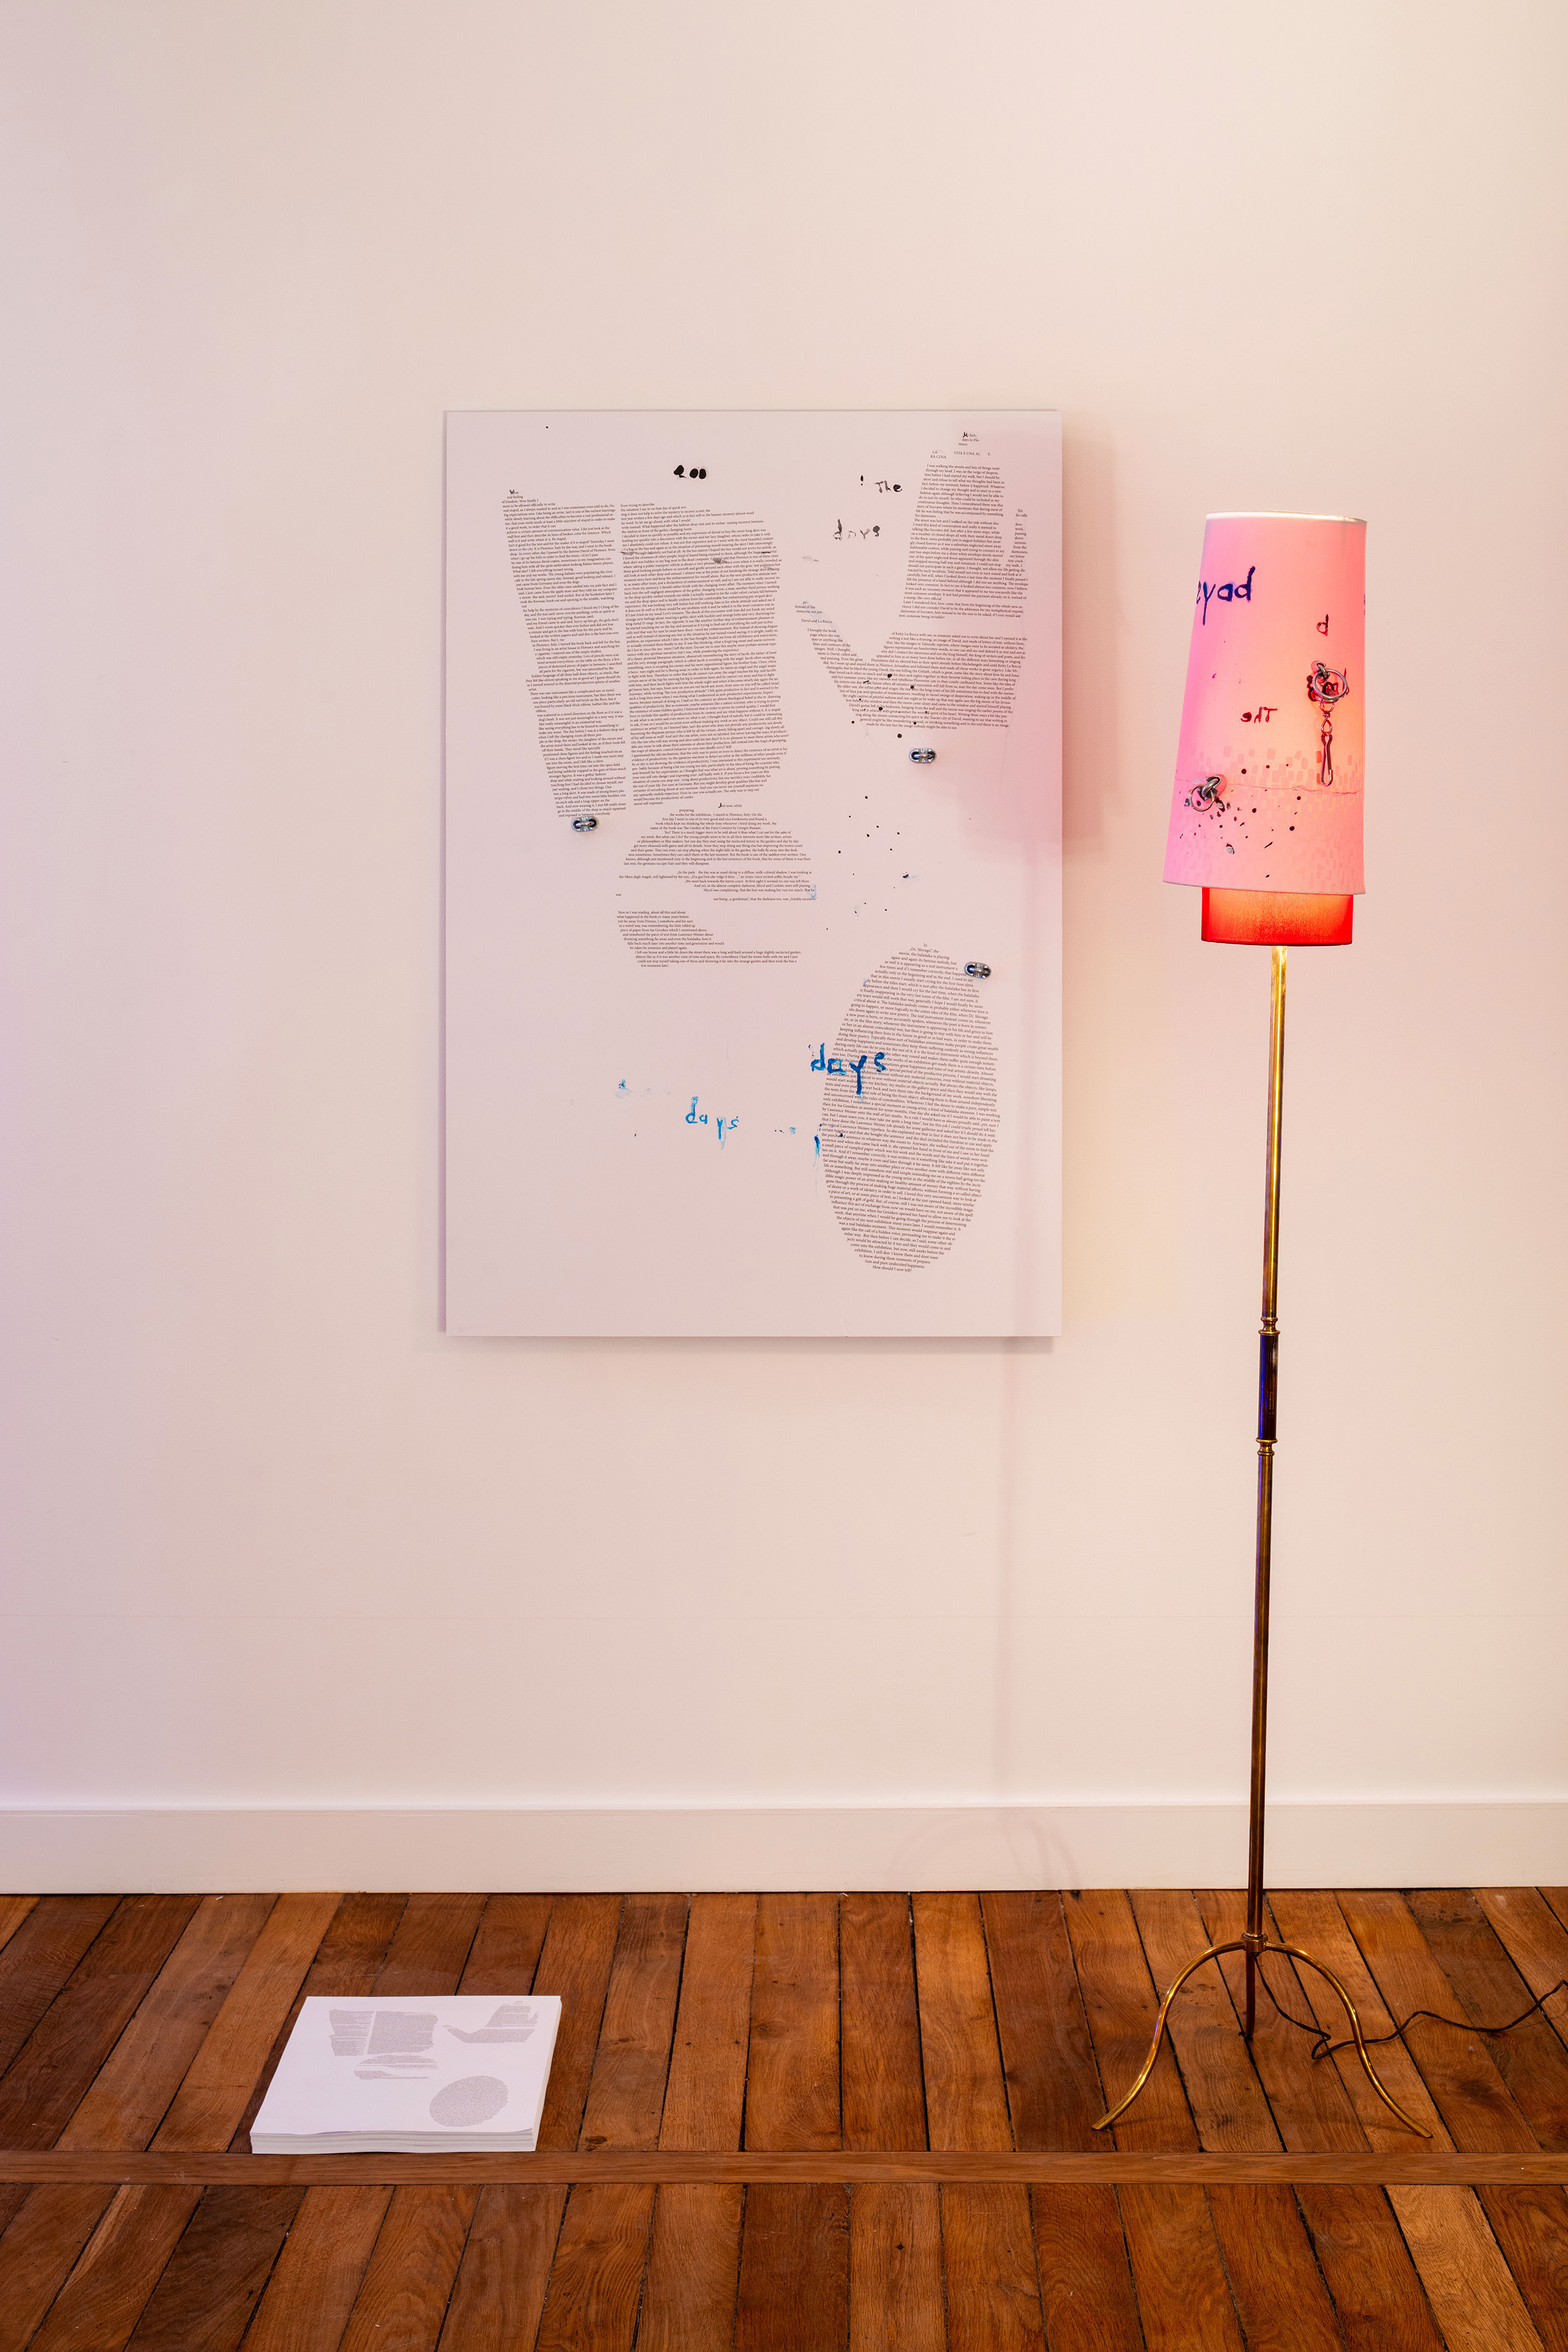 Josef Strau, *Days at Florence – The Lamp as a Printer*, 2011, C-print on aluminium Dibond, metal, ink, glue, modified copper lamp and overworked lamp shade